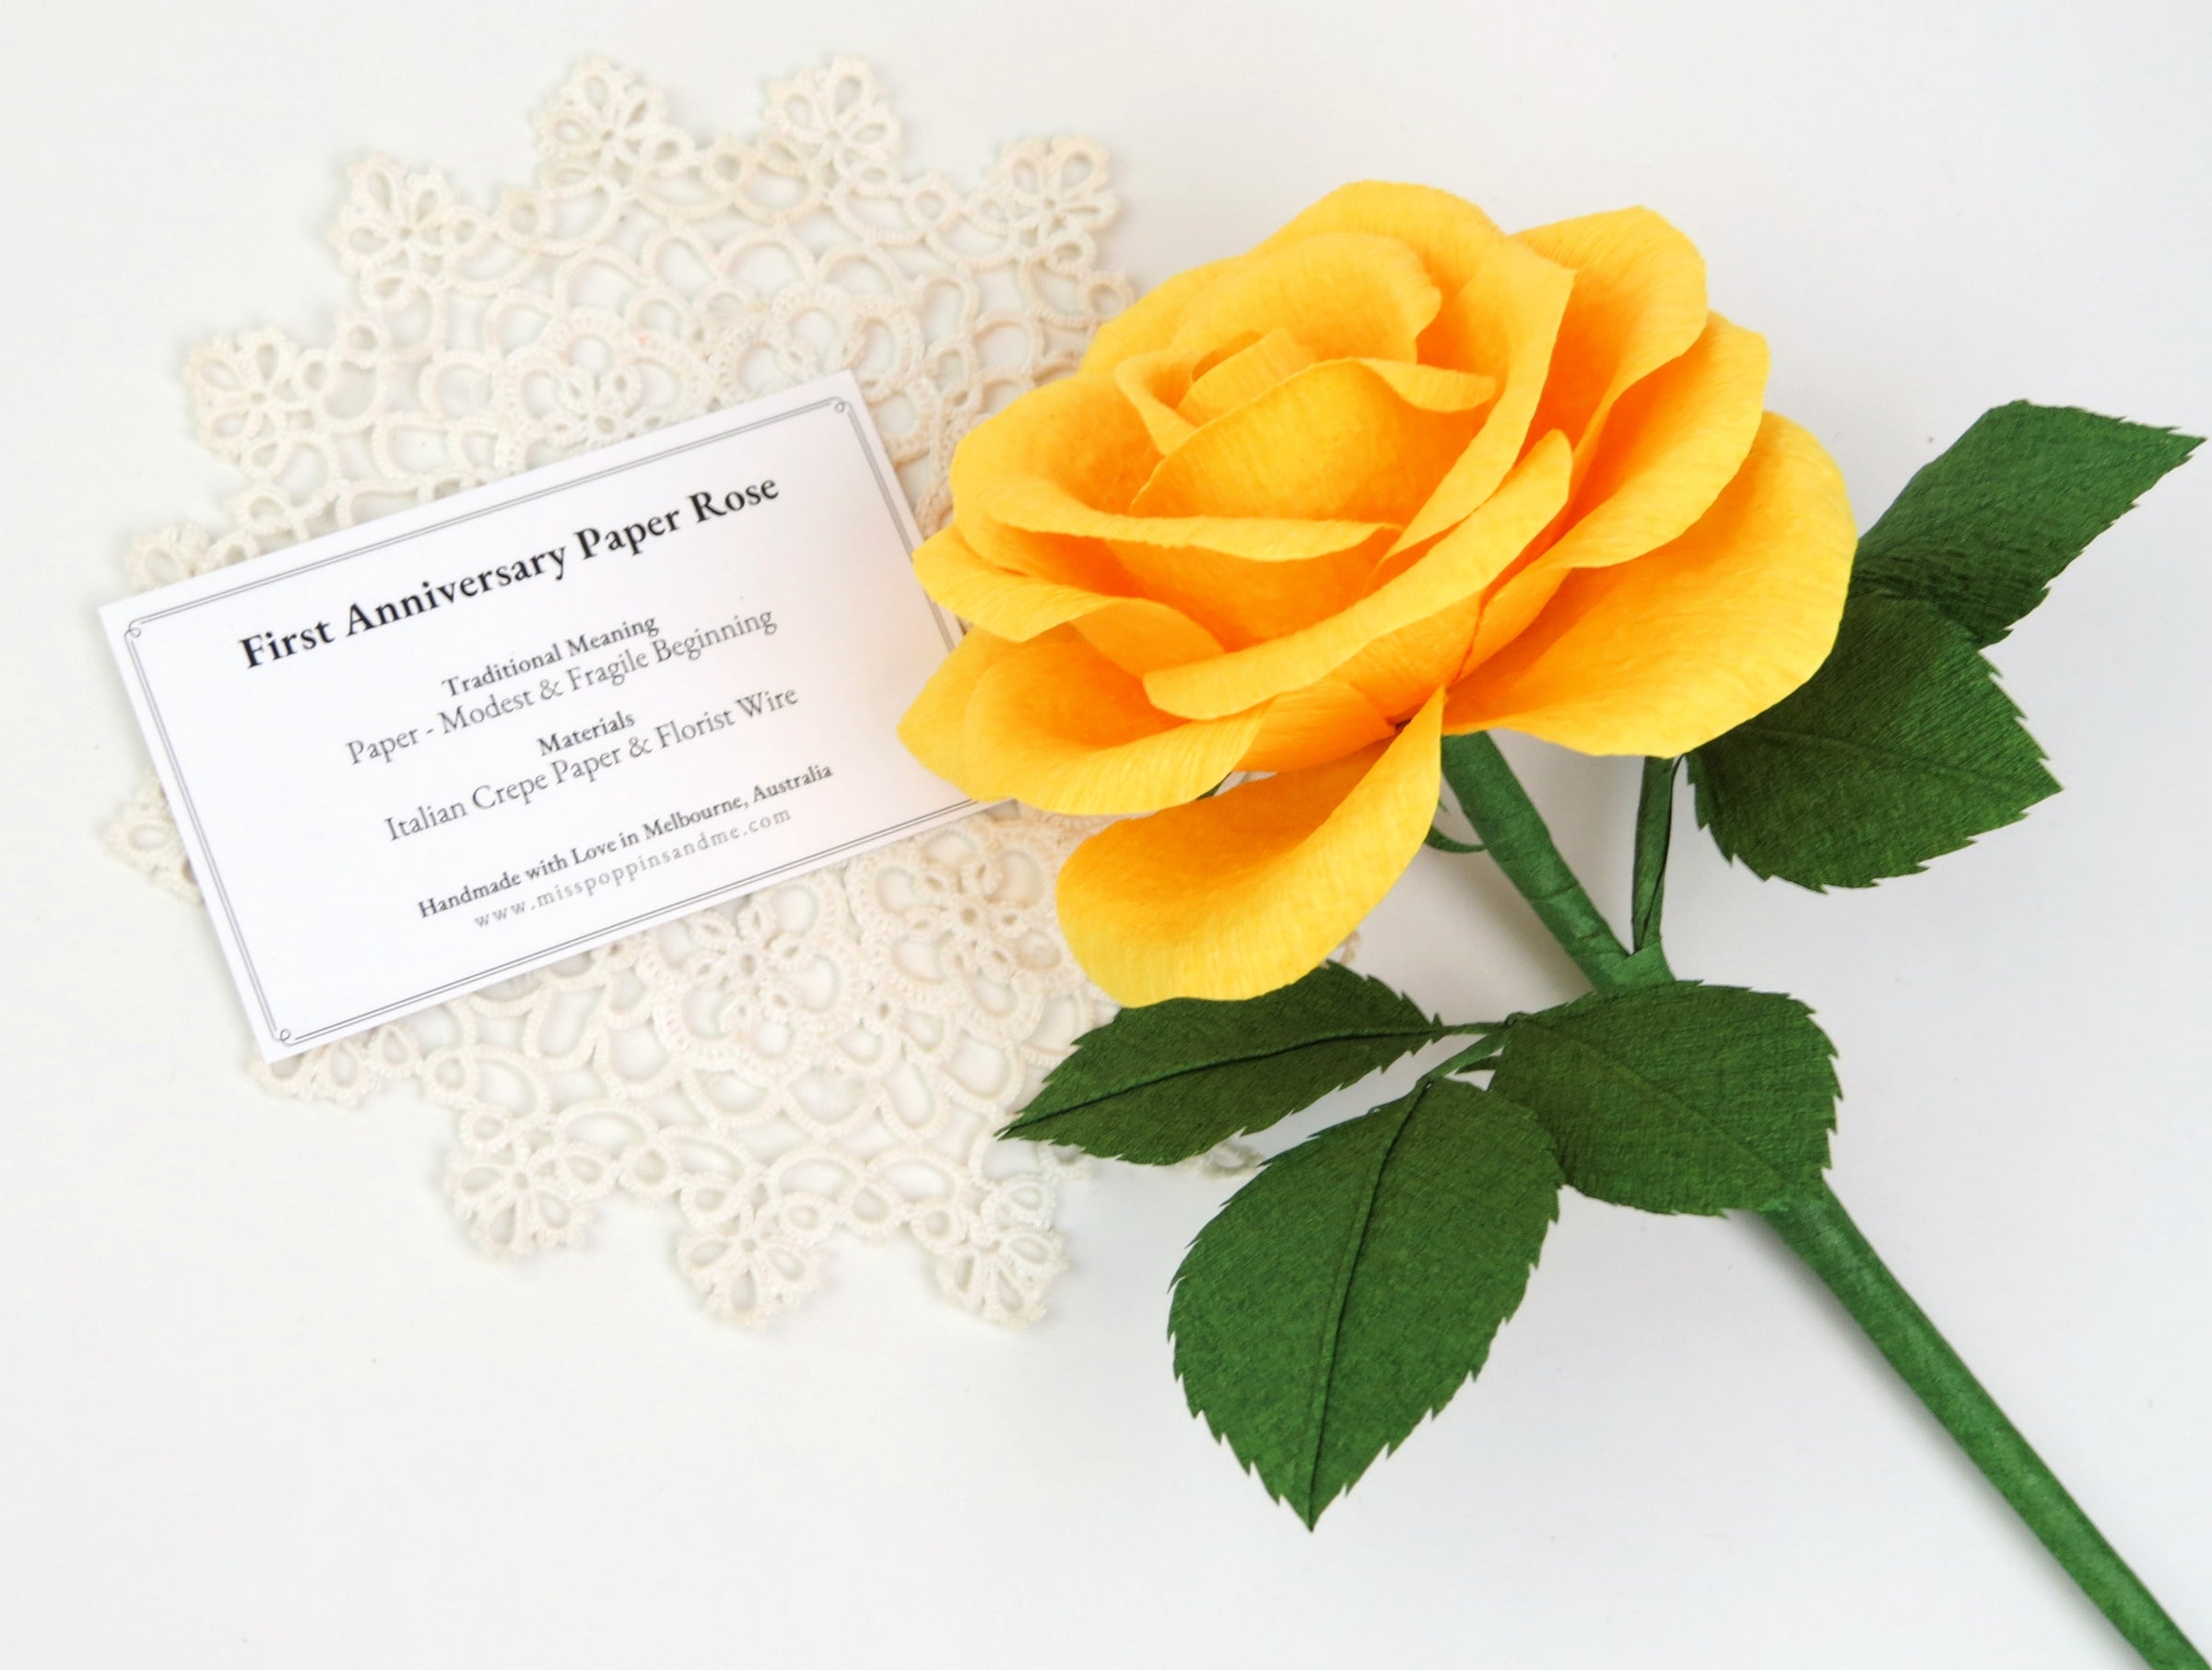 Bright yellow paper rose lying on a small white vintage doily which has a product tag resting on it detailing the meaning and materials of this paper rose